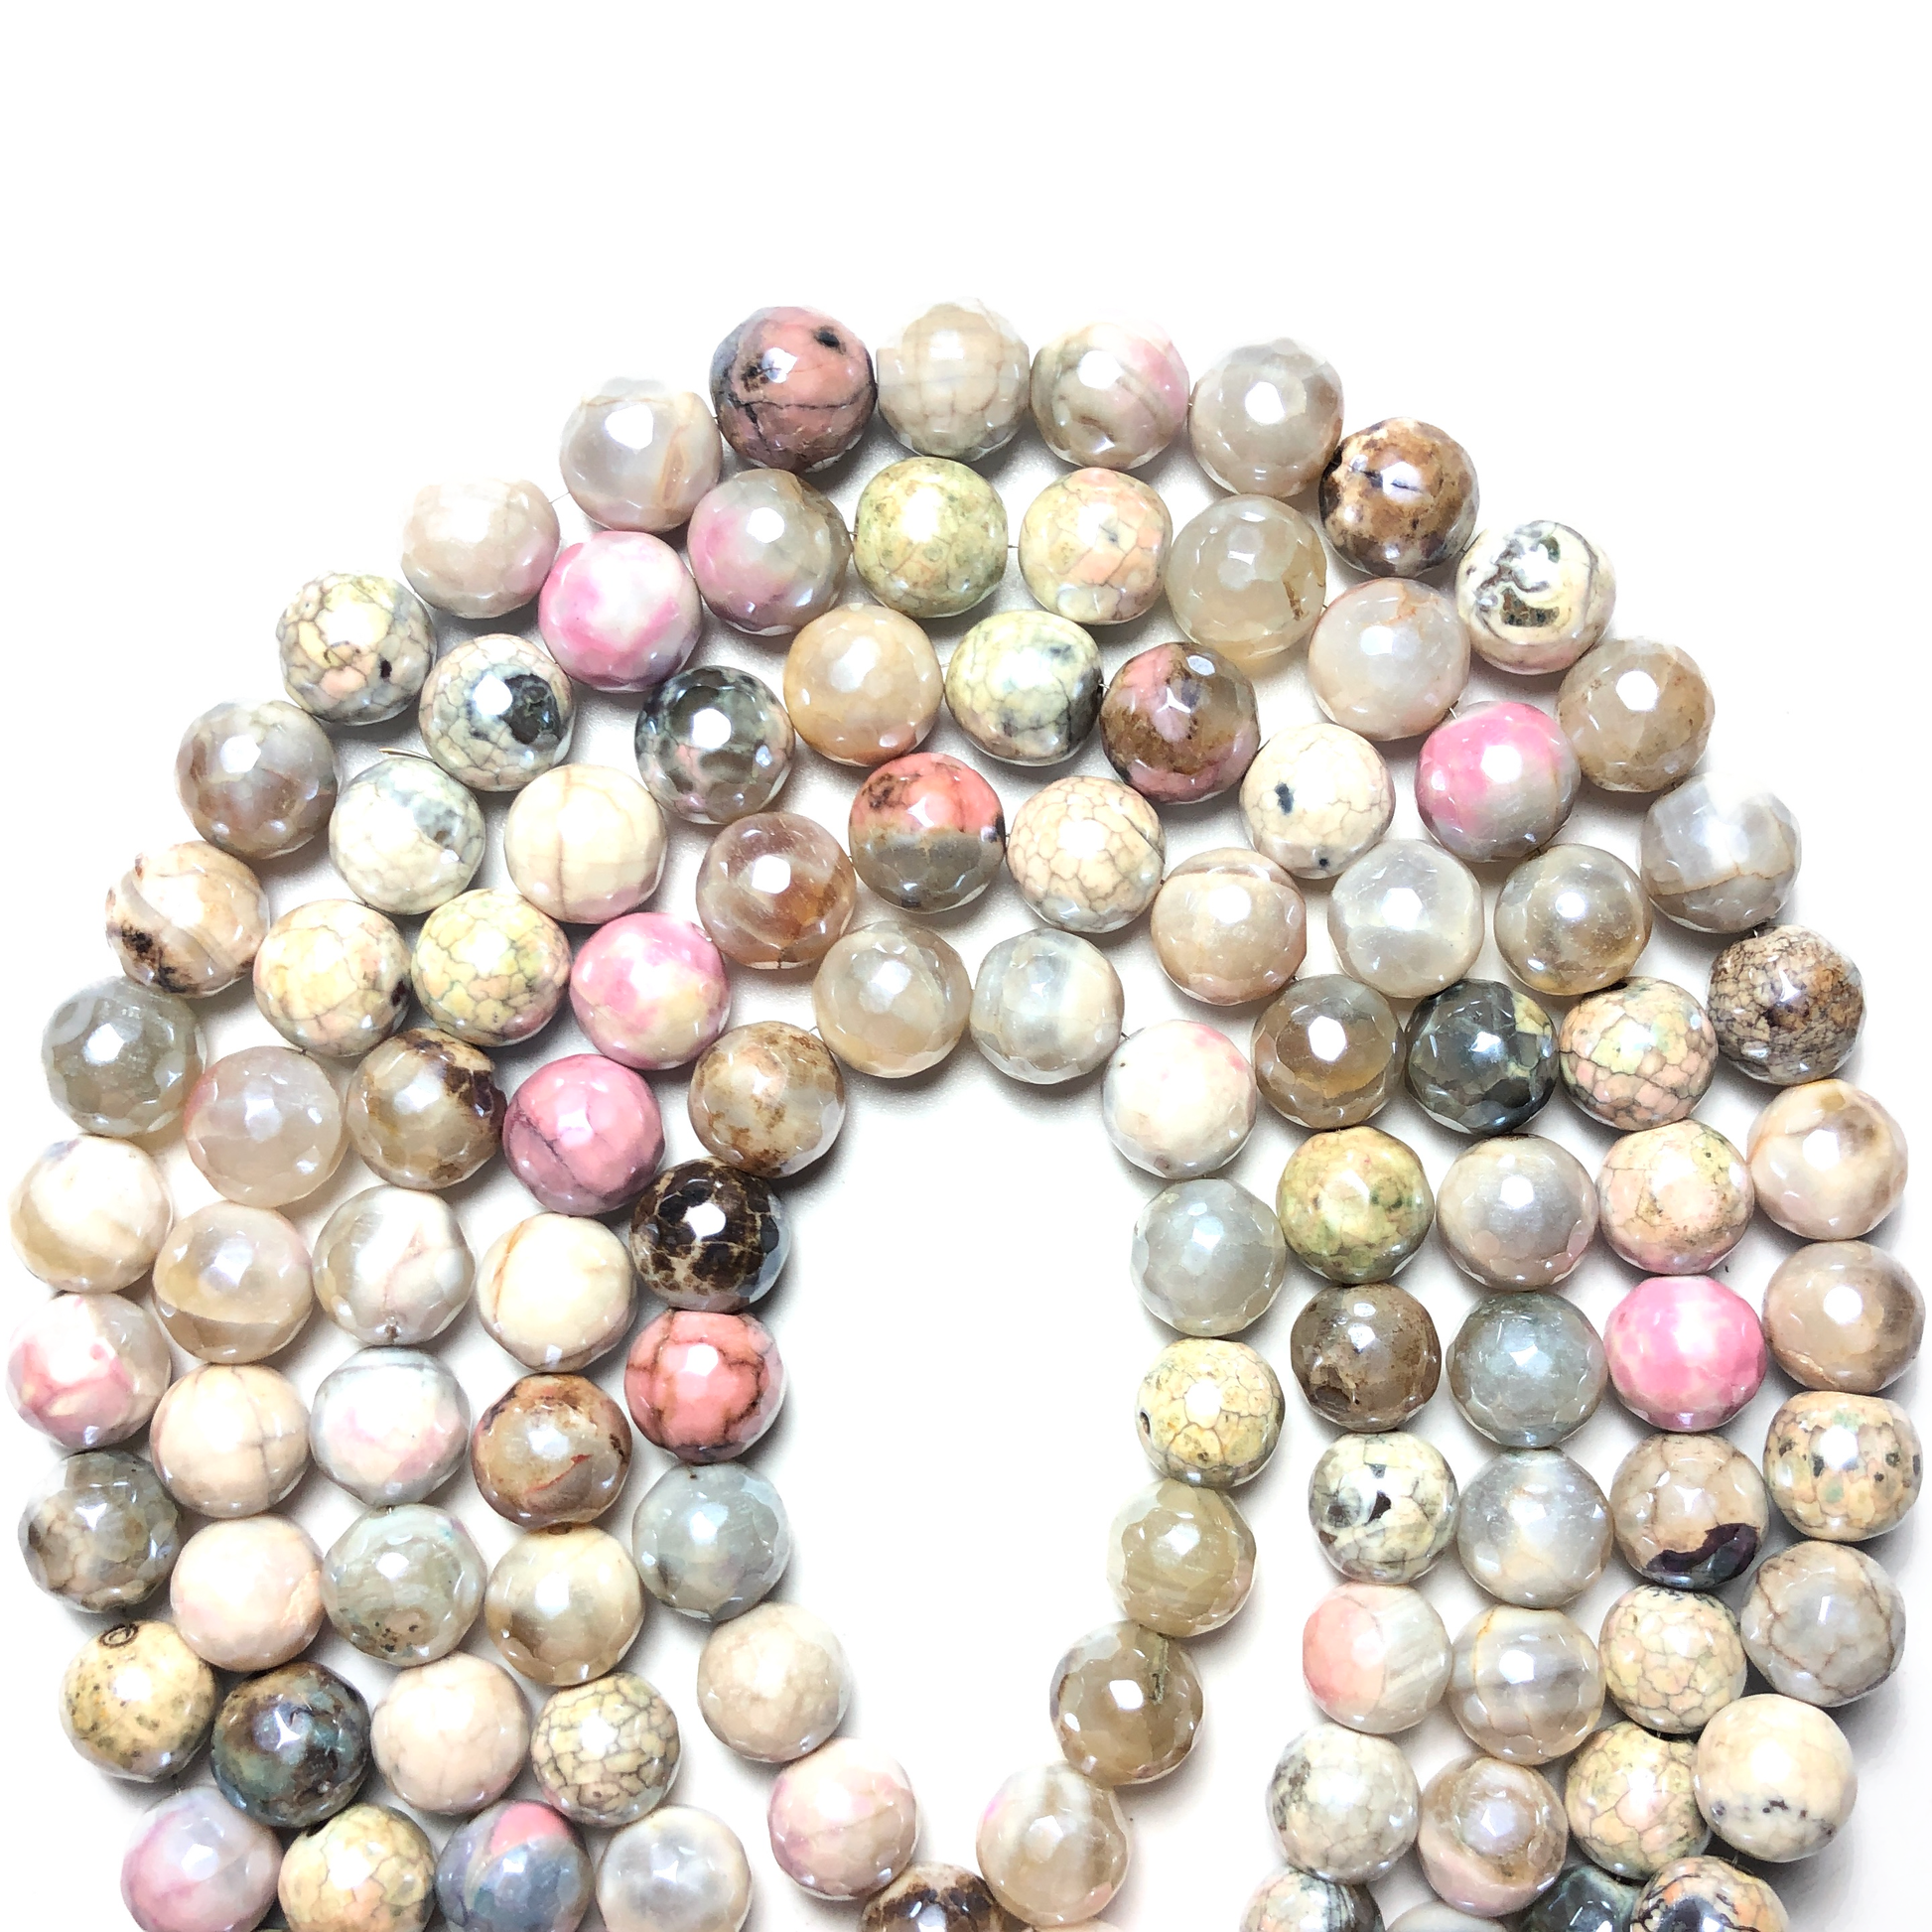 2 Strands/lot 10mm Electroplated White Pink Fire Agate Faceted Stone Beads Electroplated Beads Electroplated Faceted Agate Beads New Beads Arrivals Charms Beads Beyond